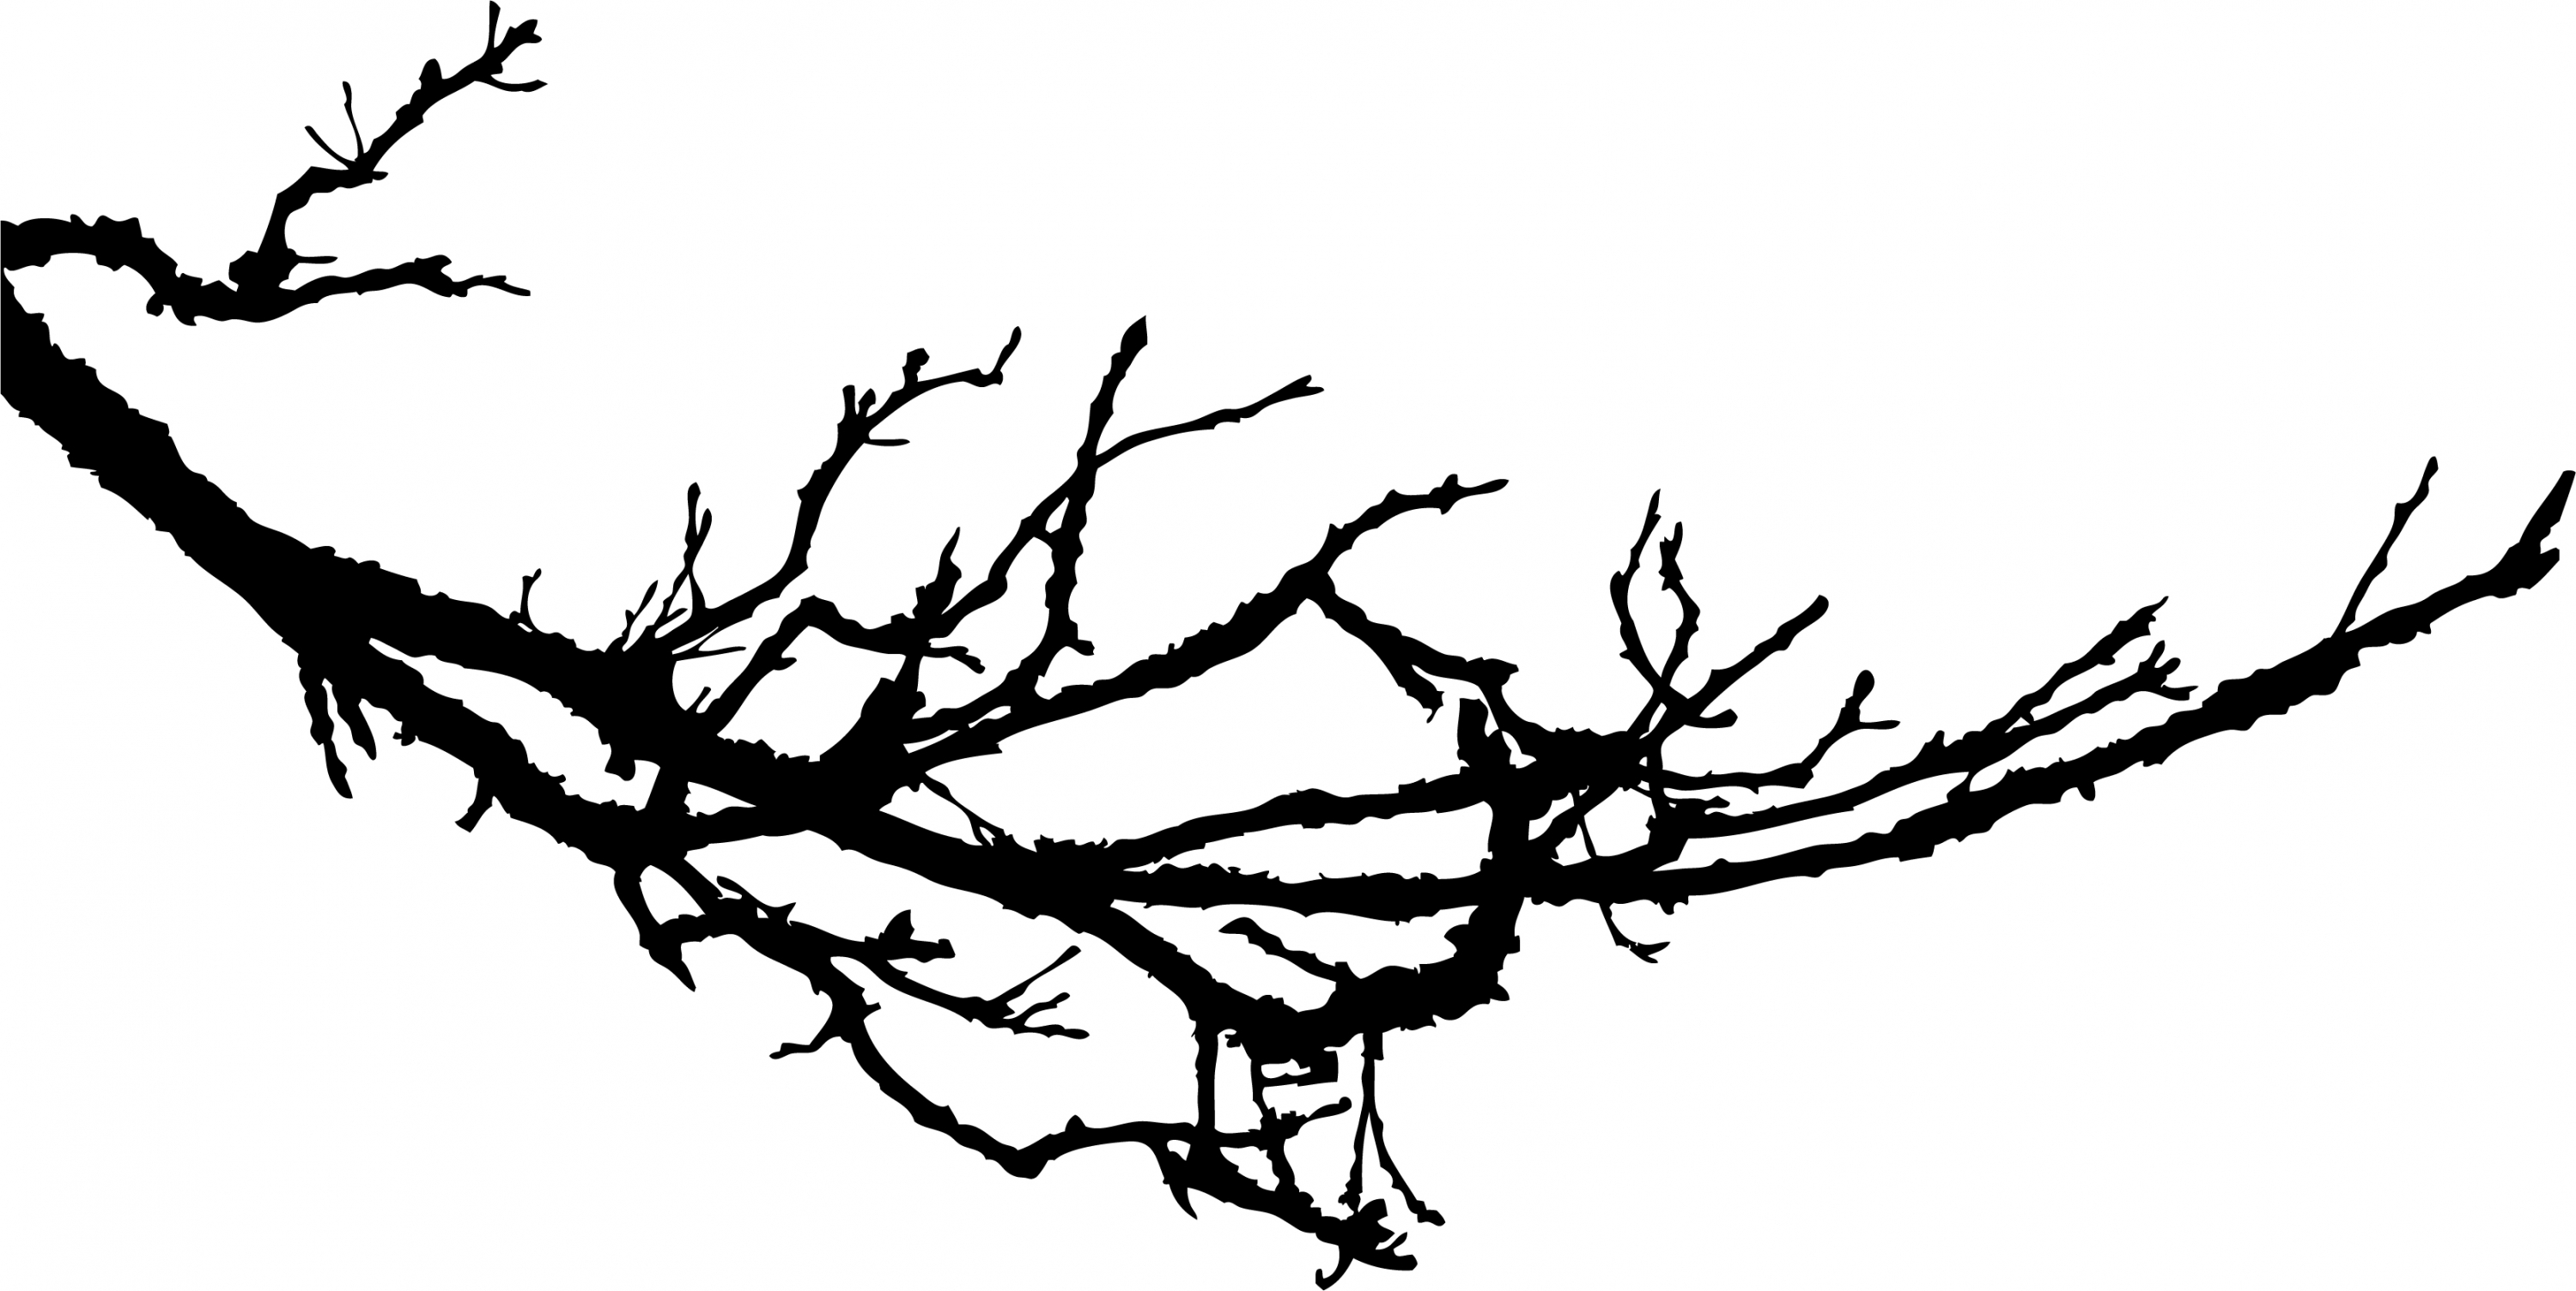 clipart of tree branches - photo #34